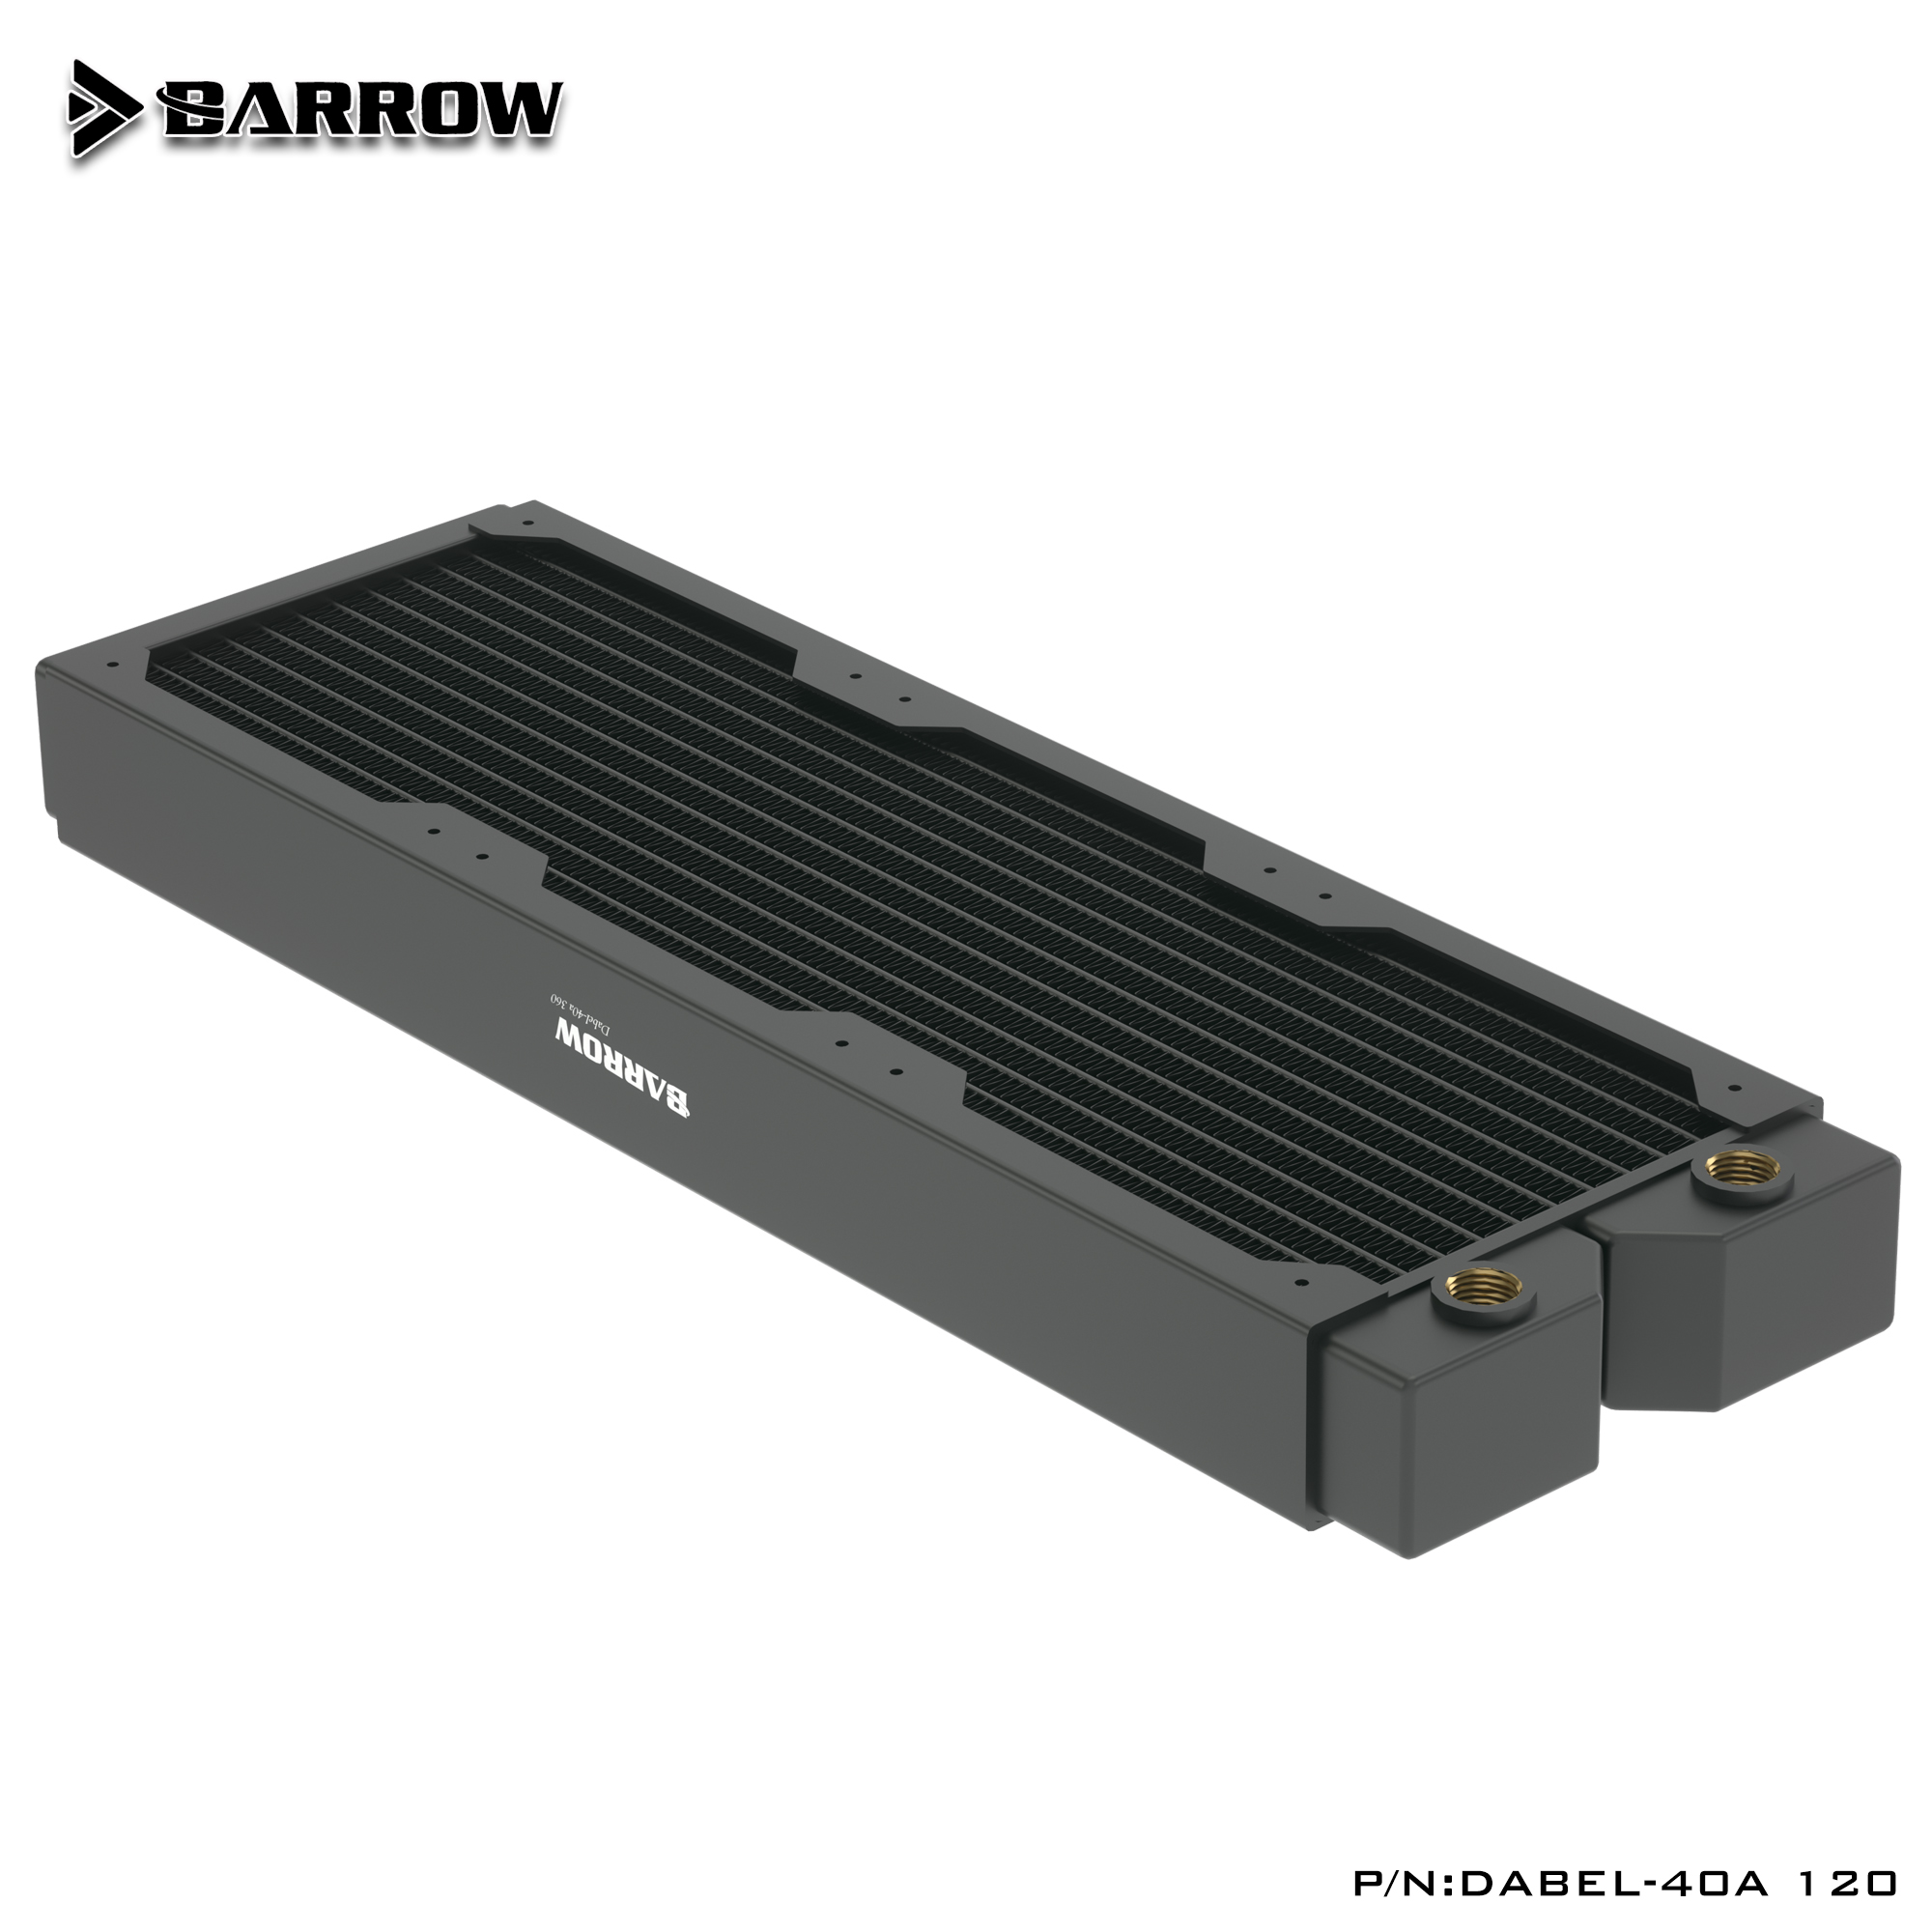 BARROW 40mm Thickness Copper 360mm Radiator Computer Water Discharge Liquid Heat Exchanger G1/4 Threaded use for 12cm Fans